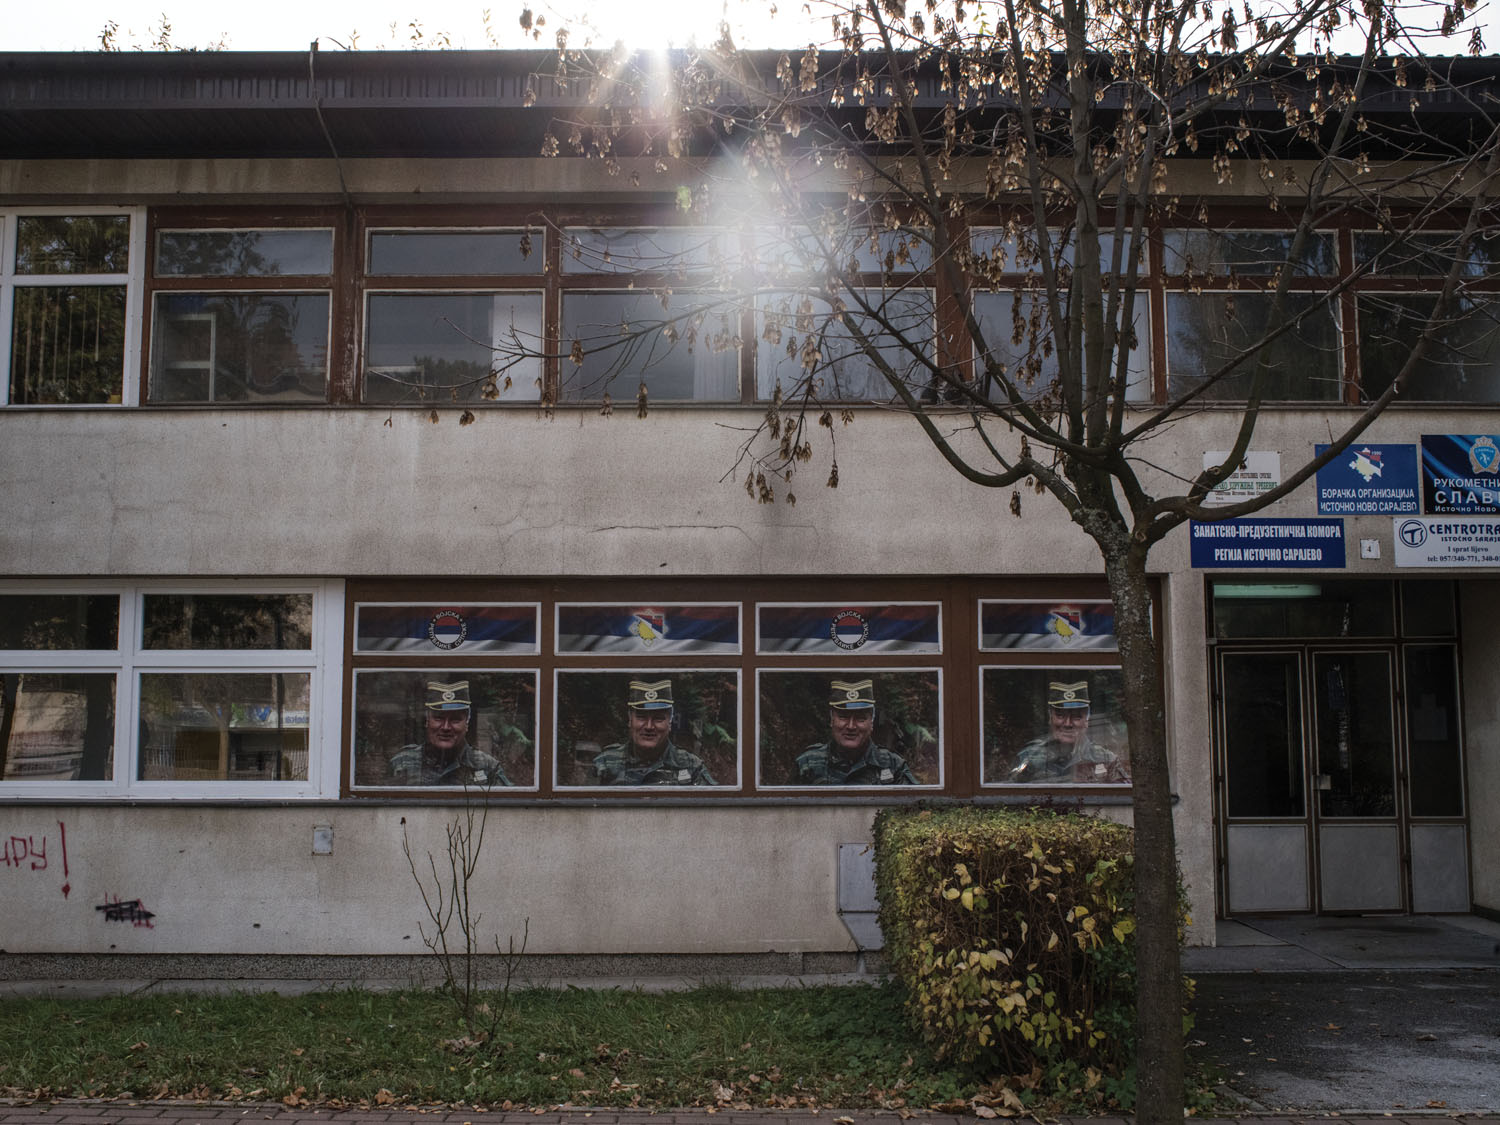 Portraits of Ratko Mladić, a Bosnian Serb general found guilty of war crimes and genocide, in a Serb-dominated municipality of Republika Srpska. November 2018.